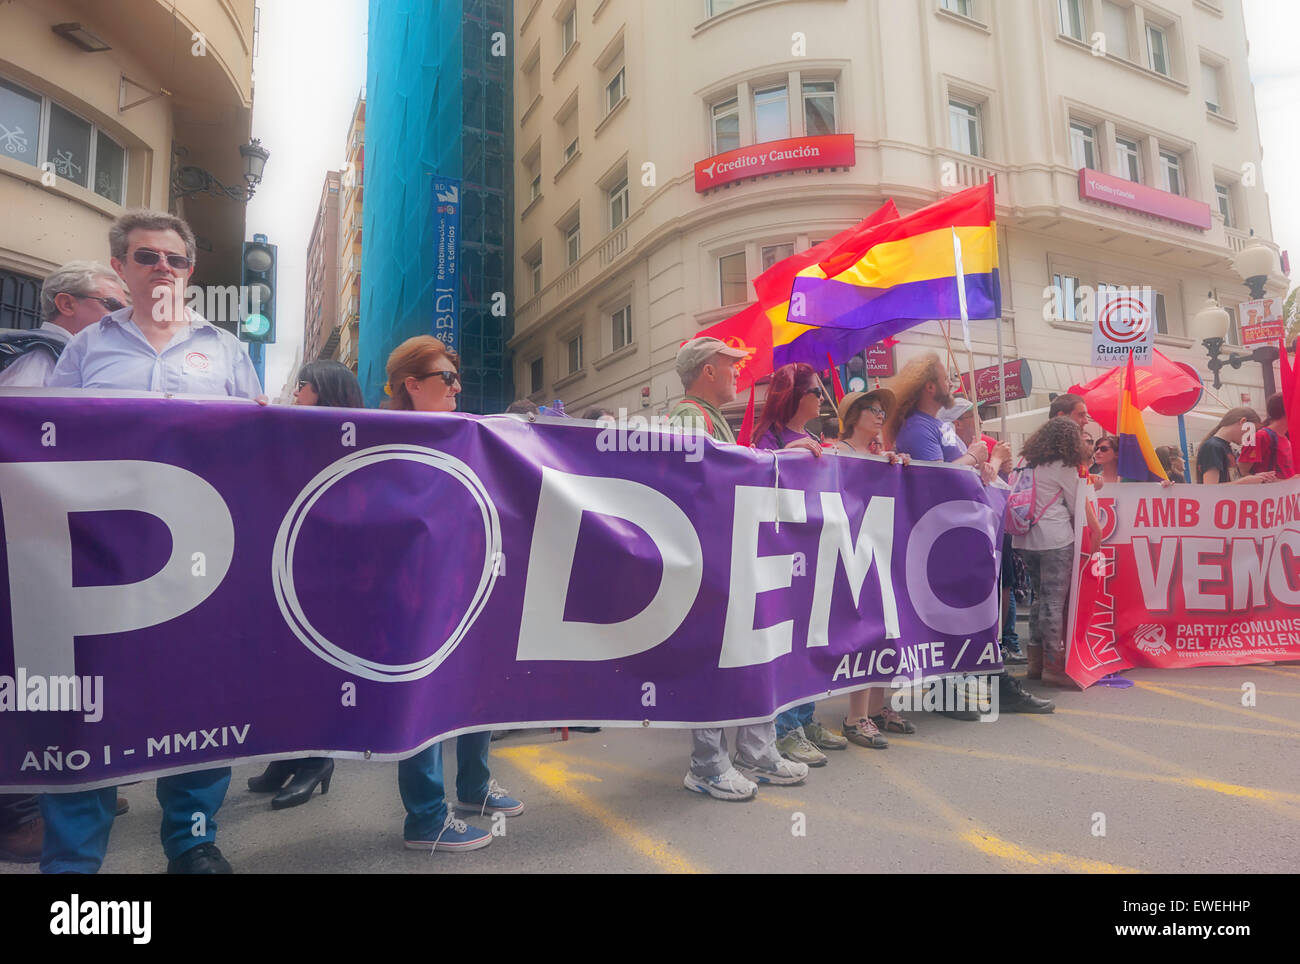 -Demonstrations against cuts in Spain- Alicante (Spain). Stock Photo